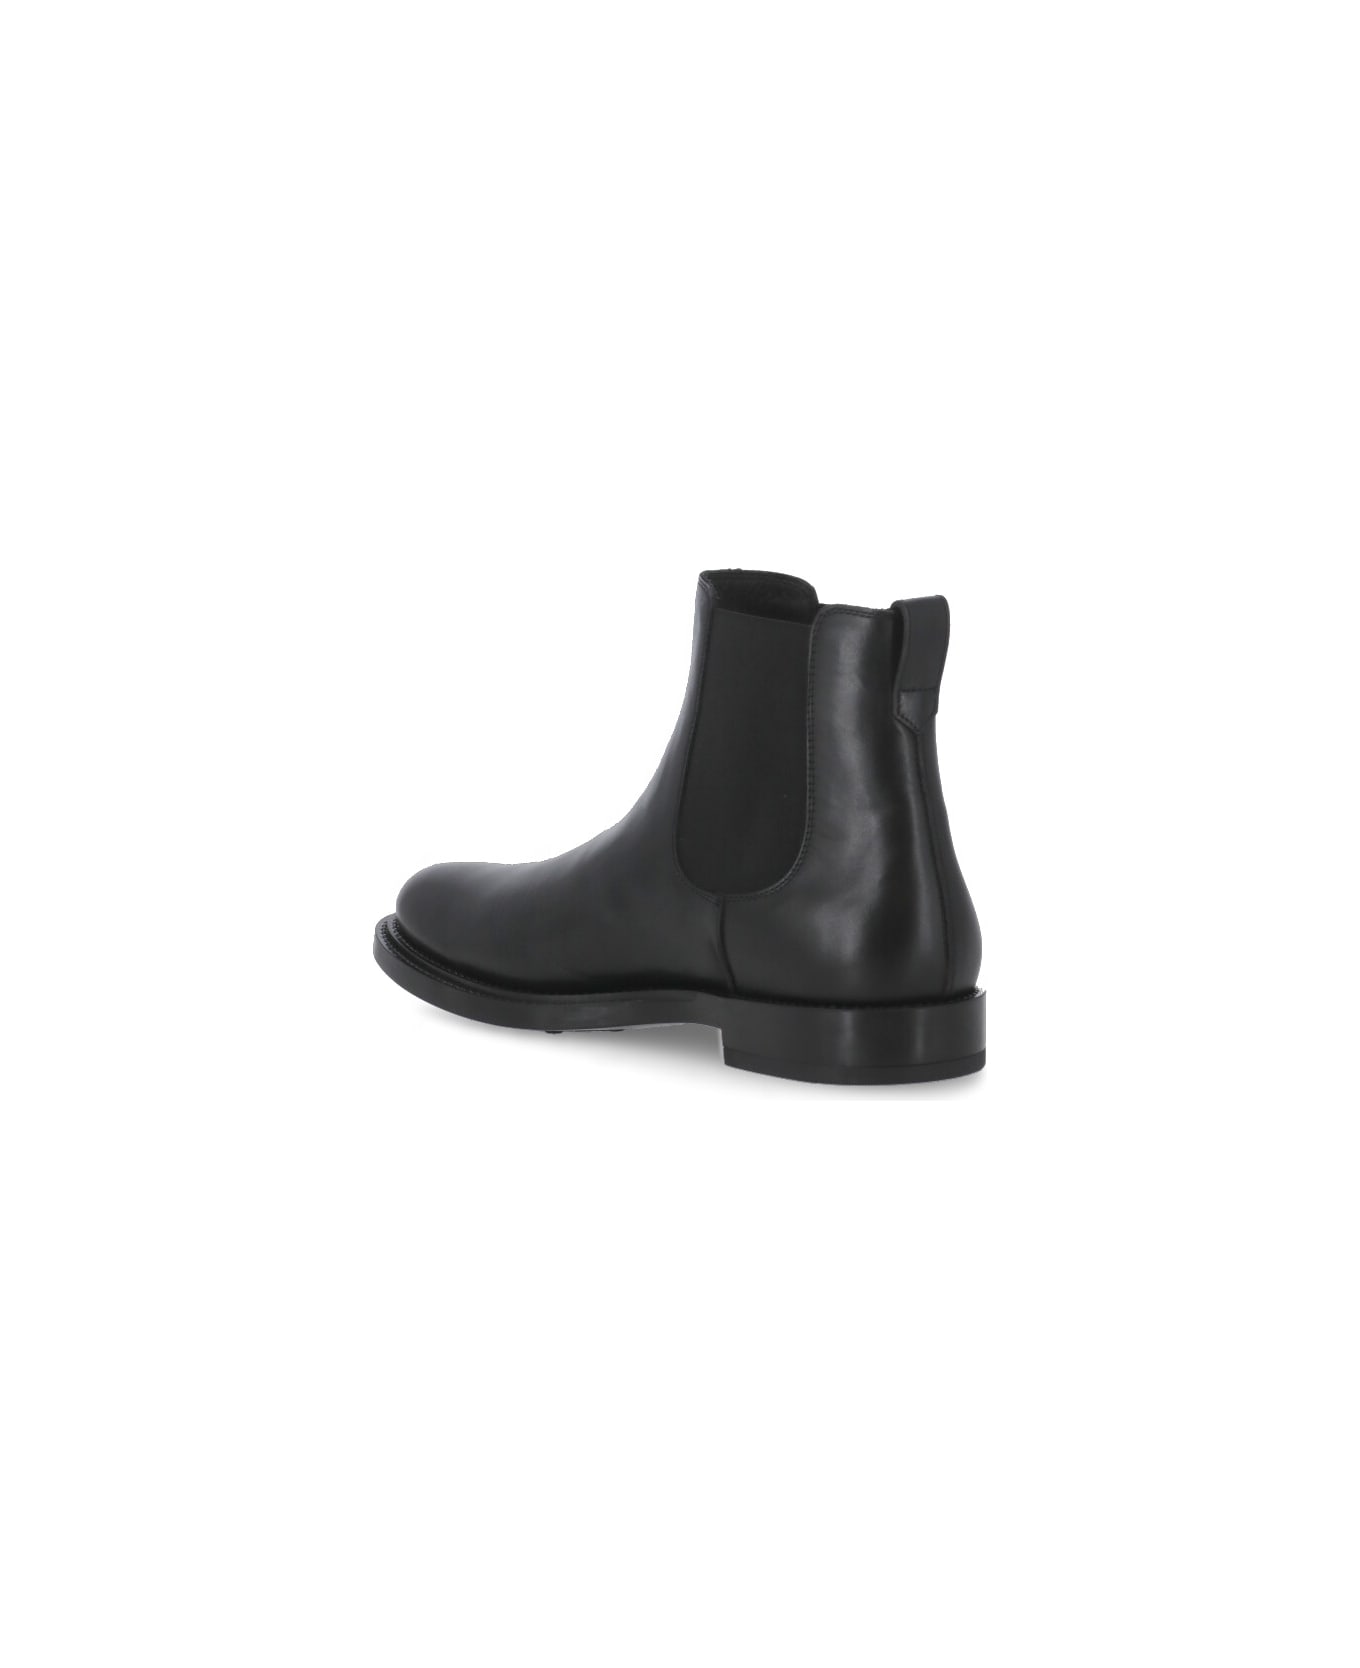 Tod's Suede Leather Chelsea Boots - Black ブーツ